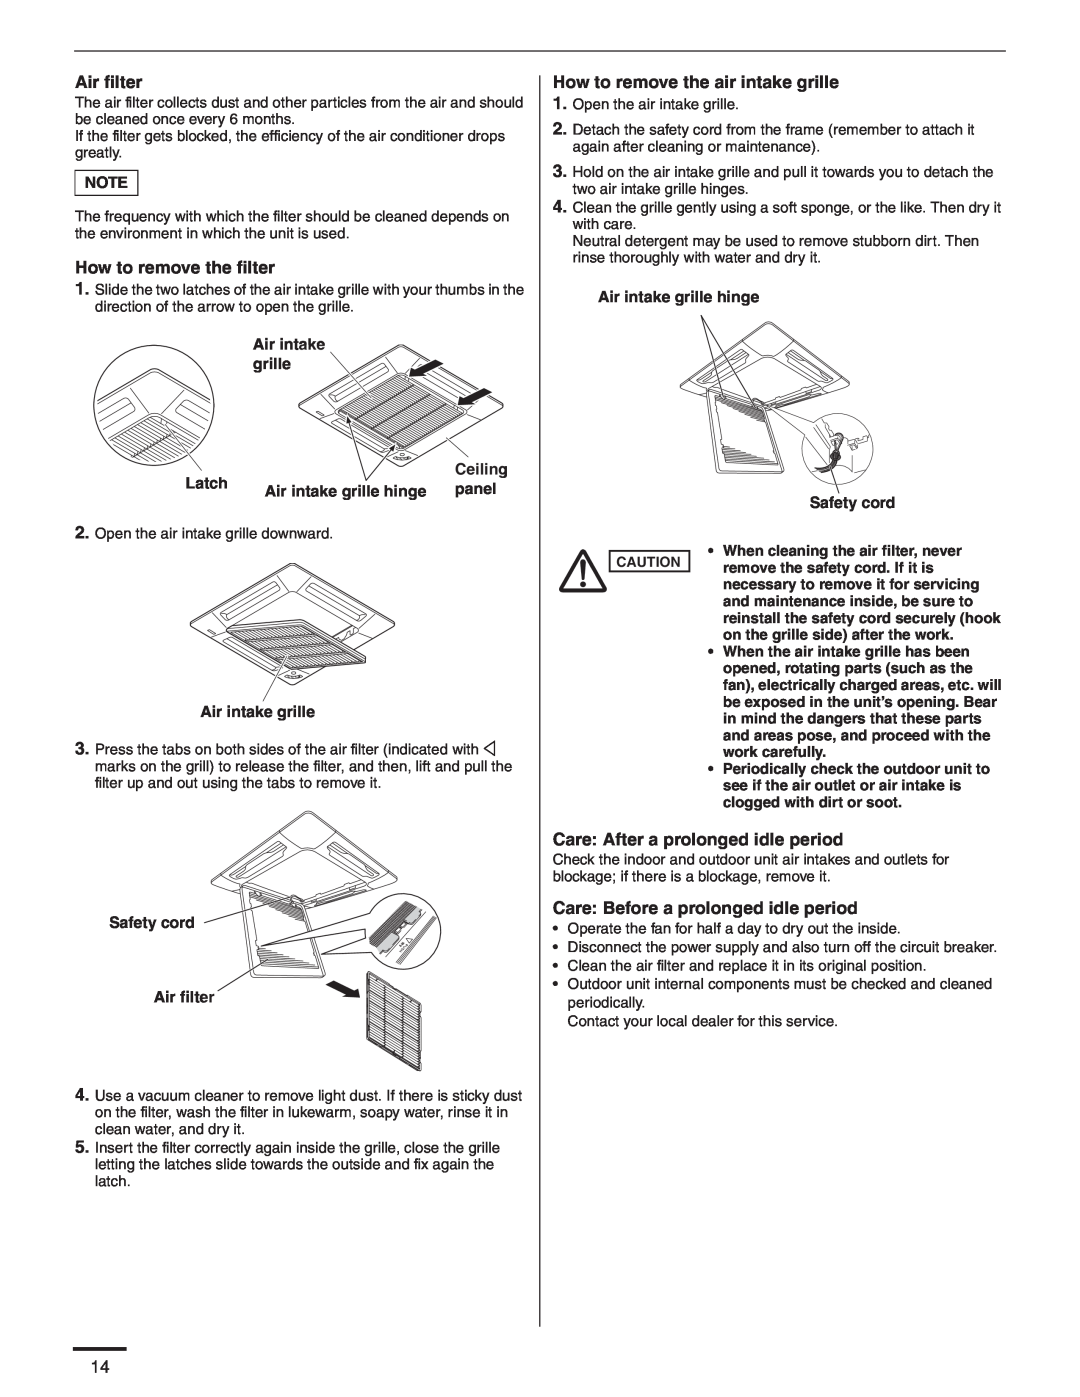 Panasonic R410A service manual Air filter, How to remove the filter, How to remove the air intake grille 